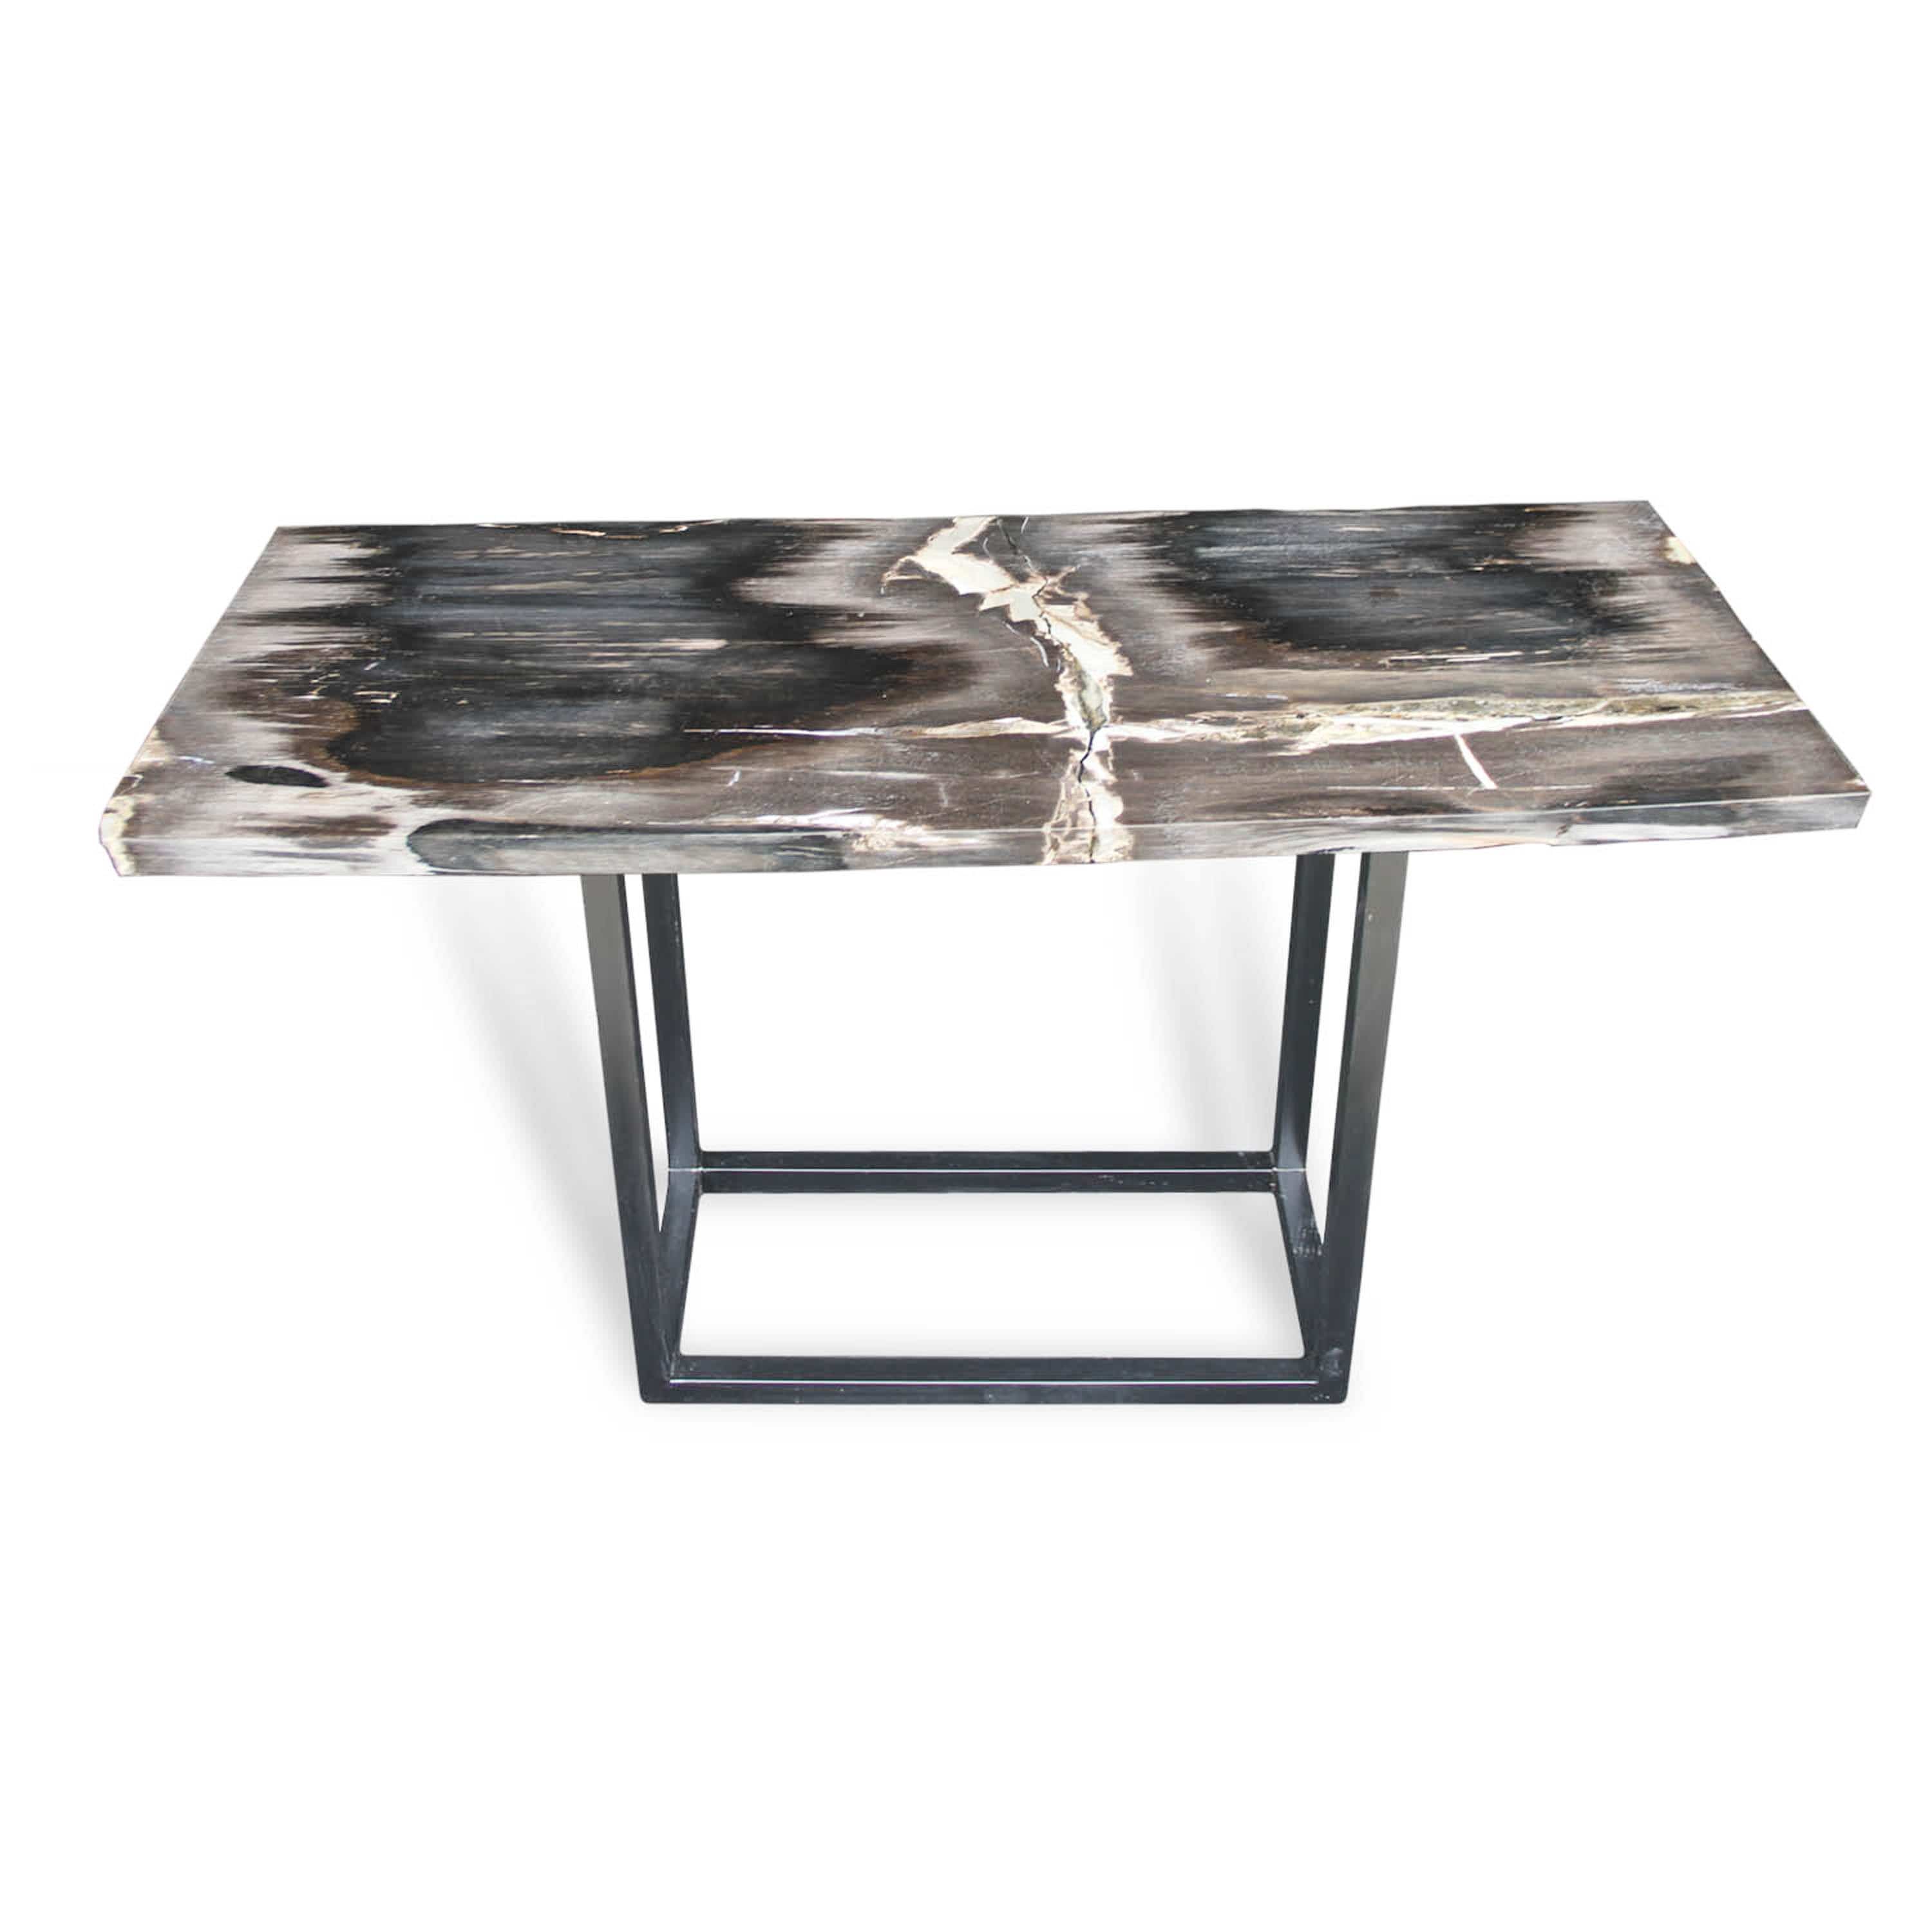 Kalifano Petrified Wood Natural Polished Petrified Wood Console Table from Indonesia - 47" / 93 lbs PWR5000.001